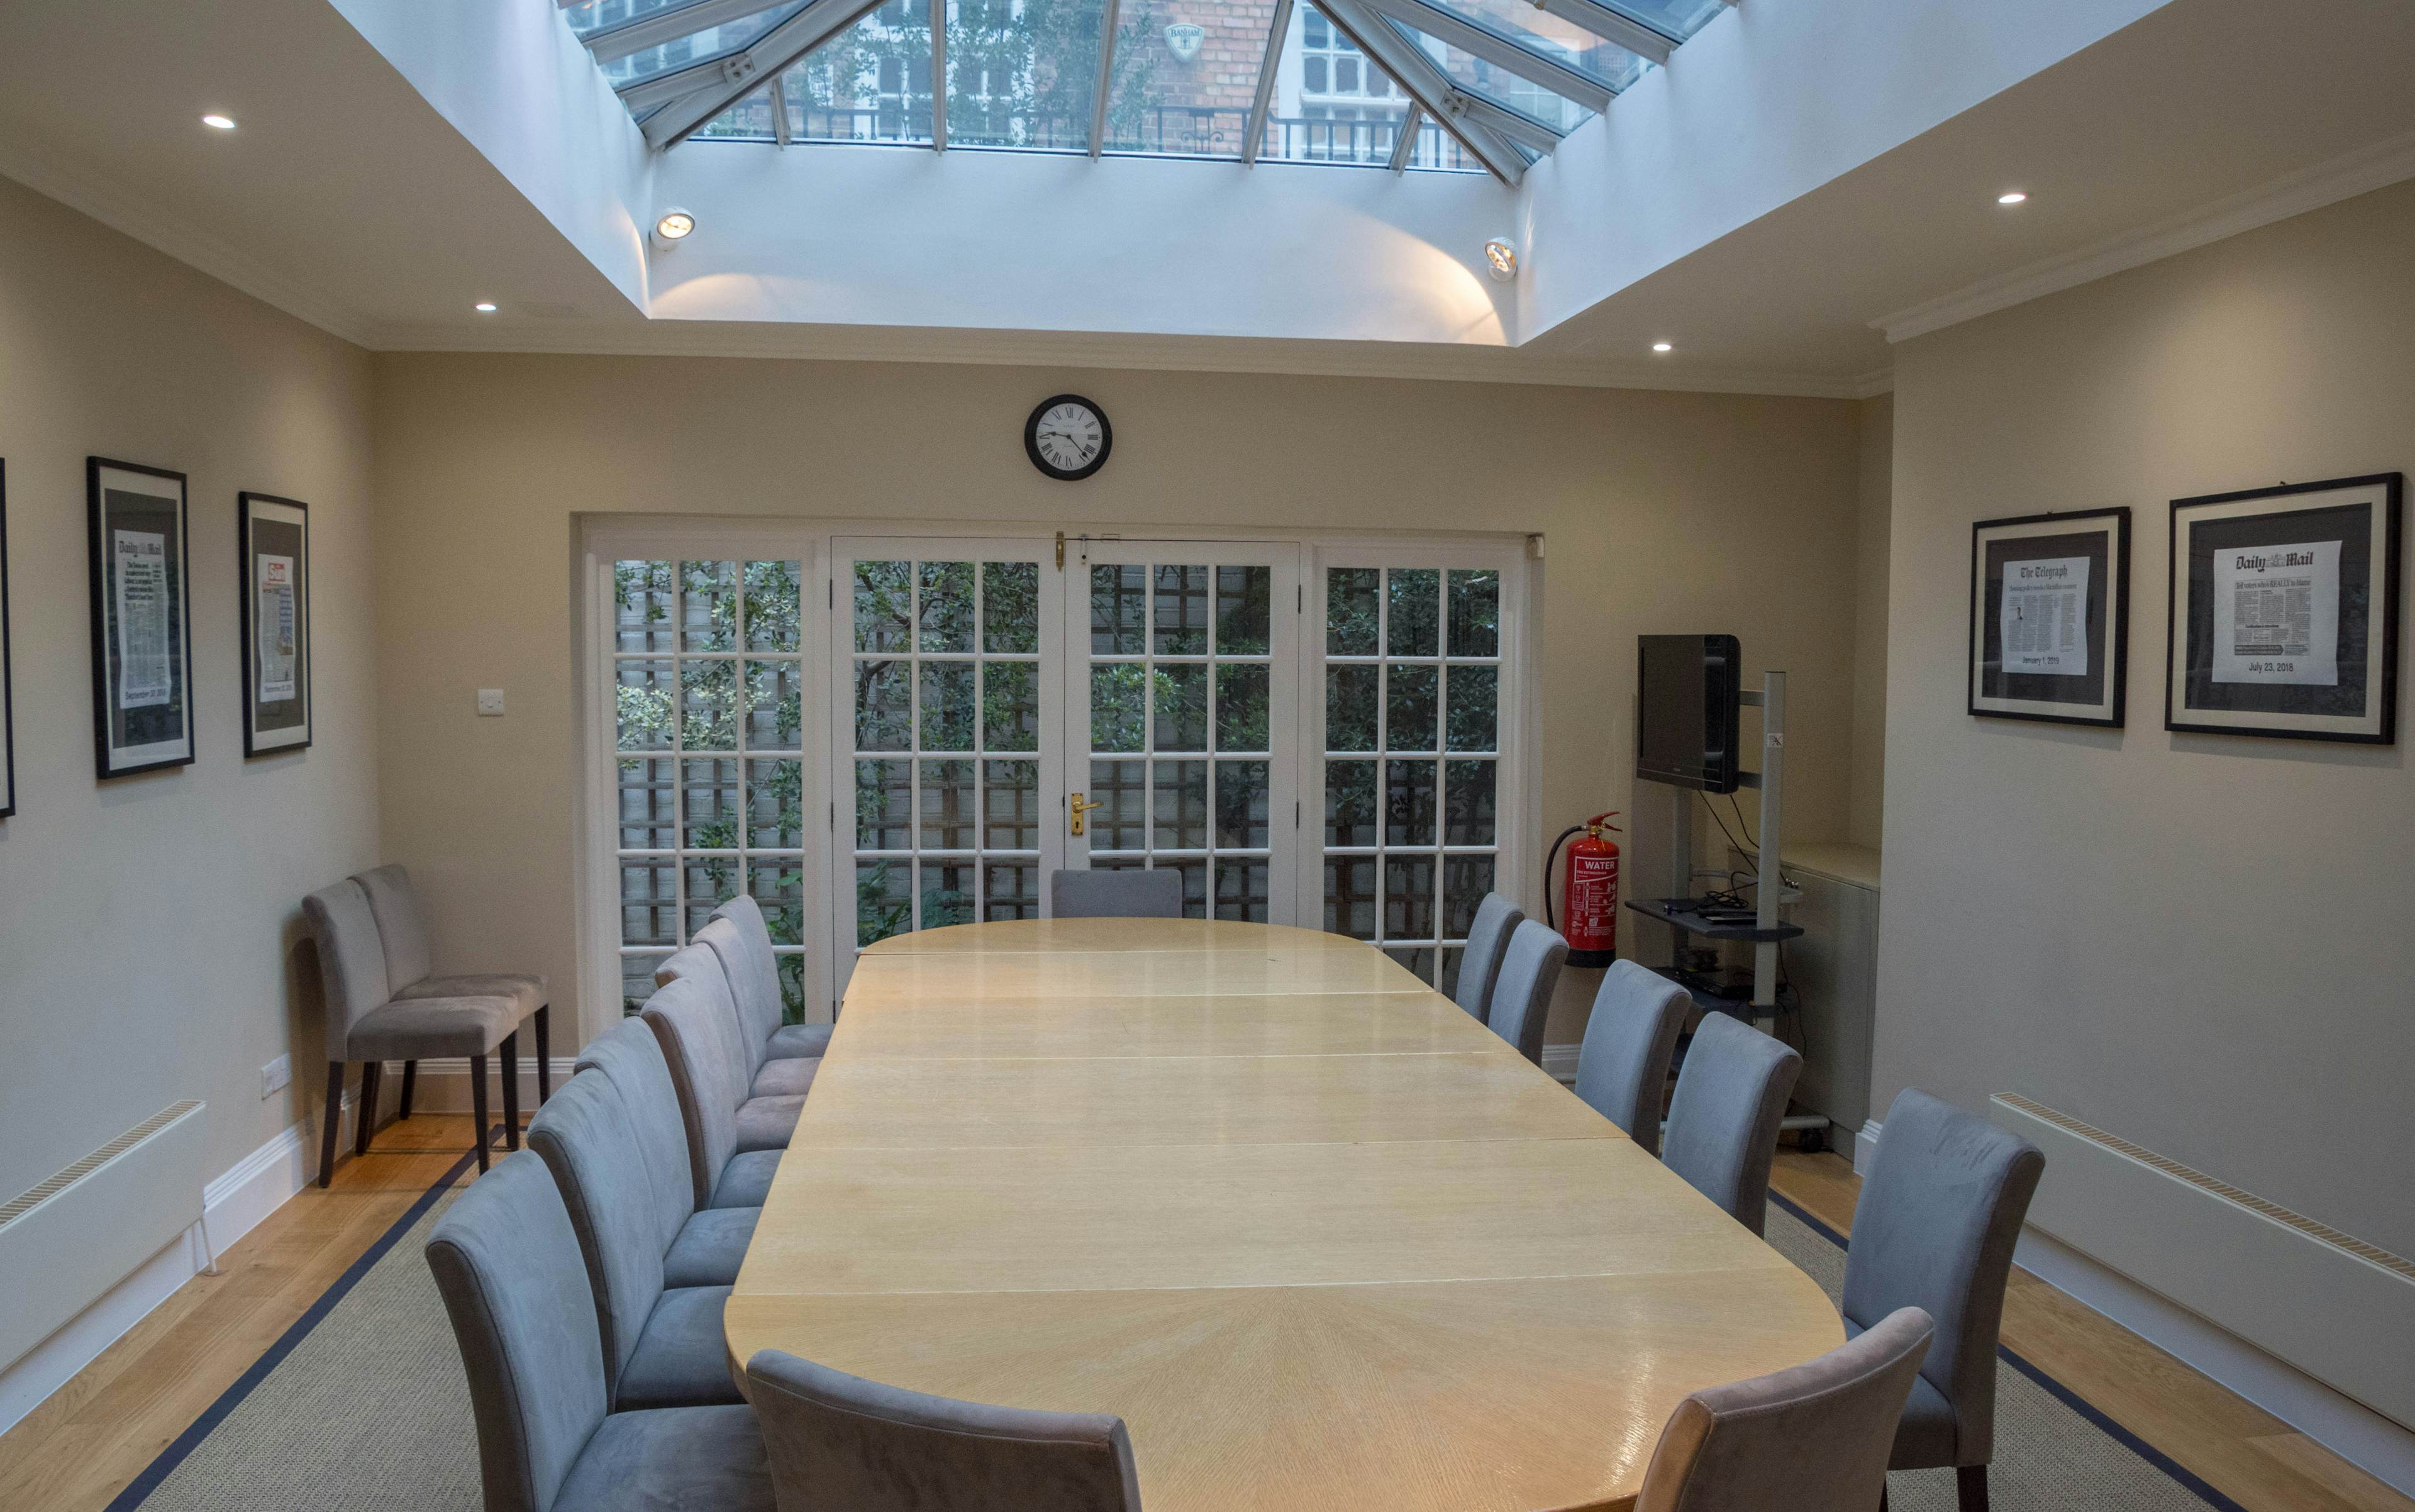 Centre for Policy Studies - Boardroom image 1